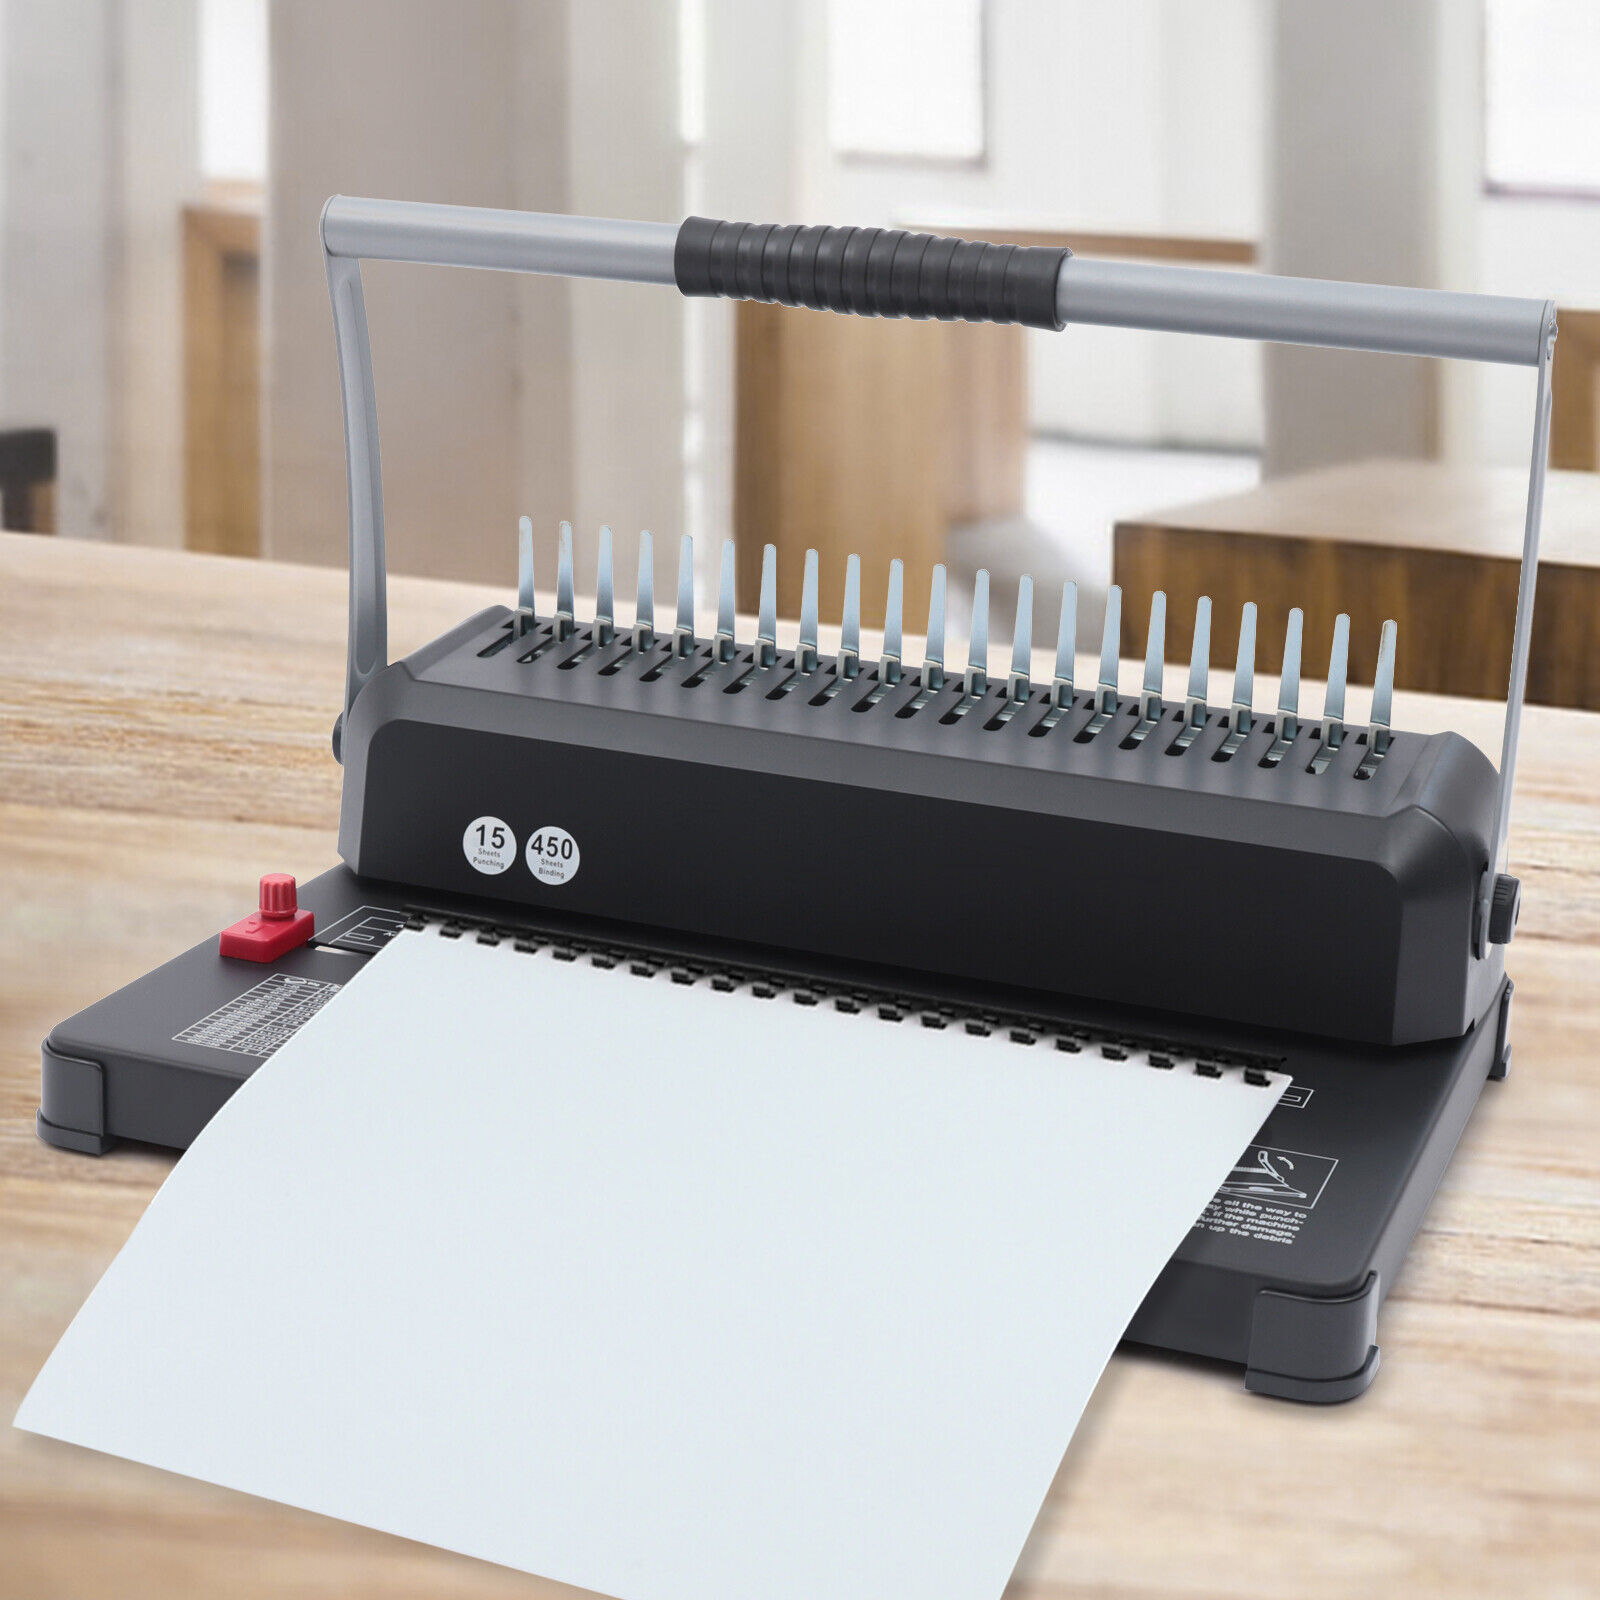 Miumaeov Binding Machine 2-in-1 Spiral Binding Machine Hole Puncher with  450 Sheets 2 Combbindings and 100 Binding Coils for 19-Hole Letter Size